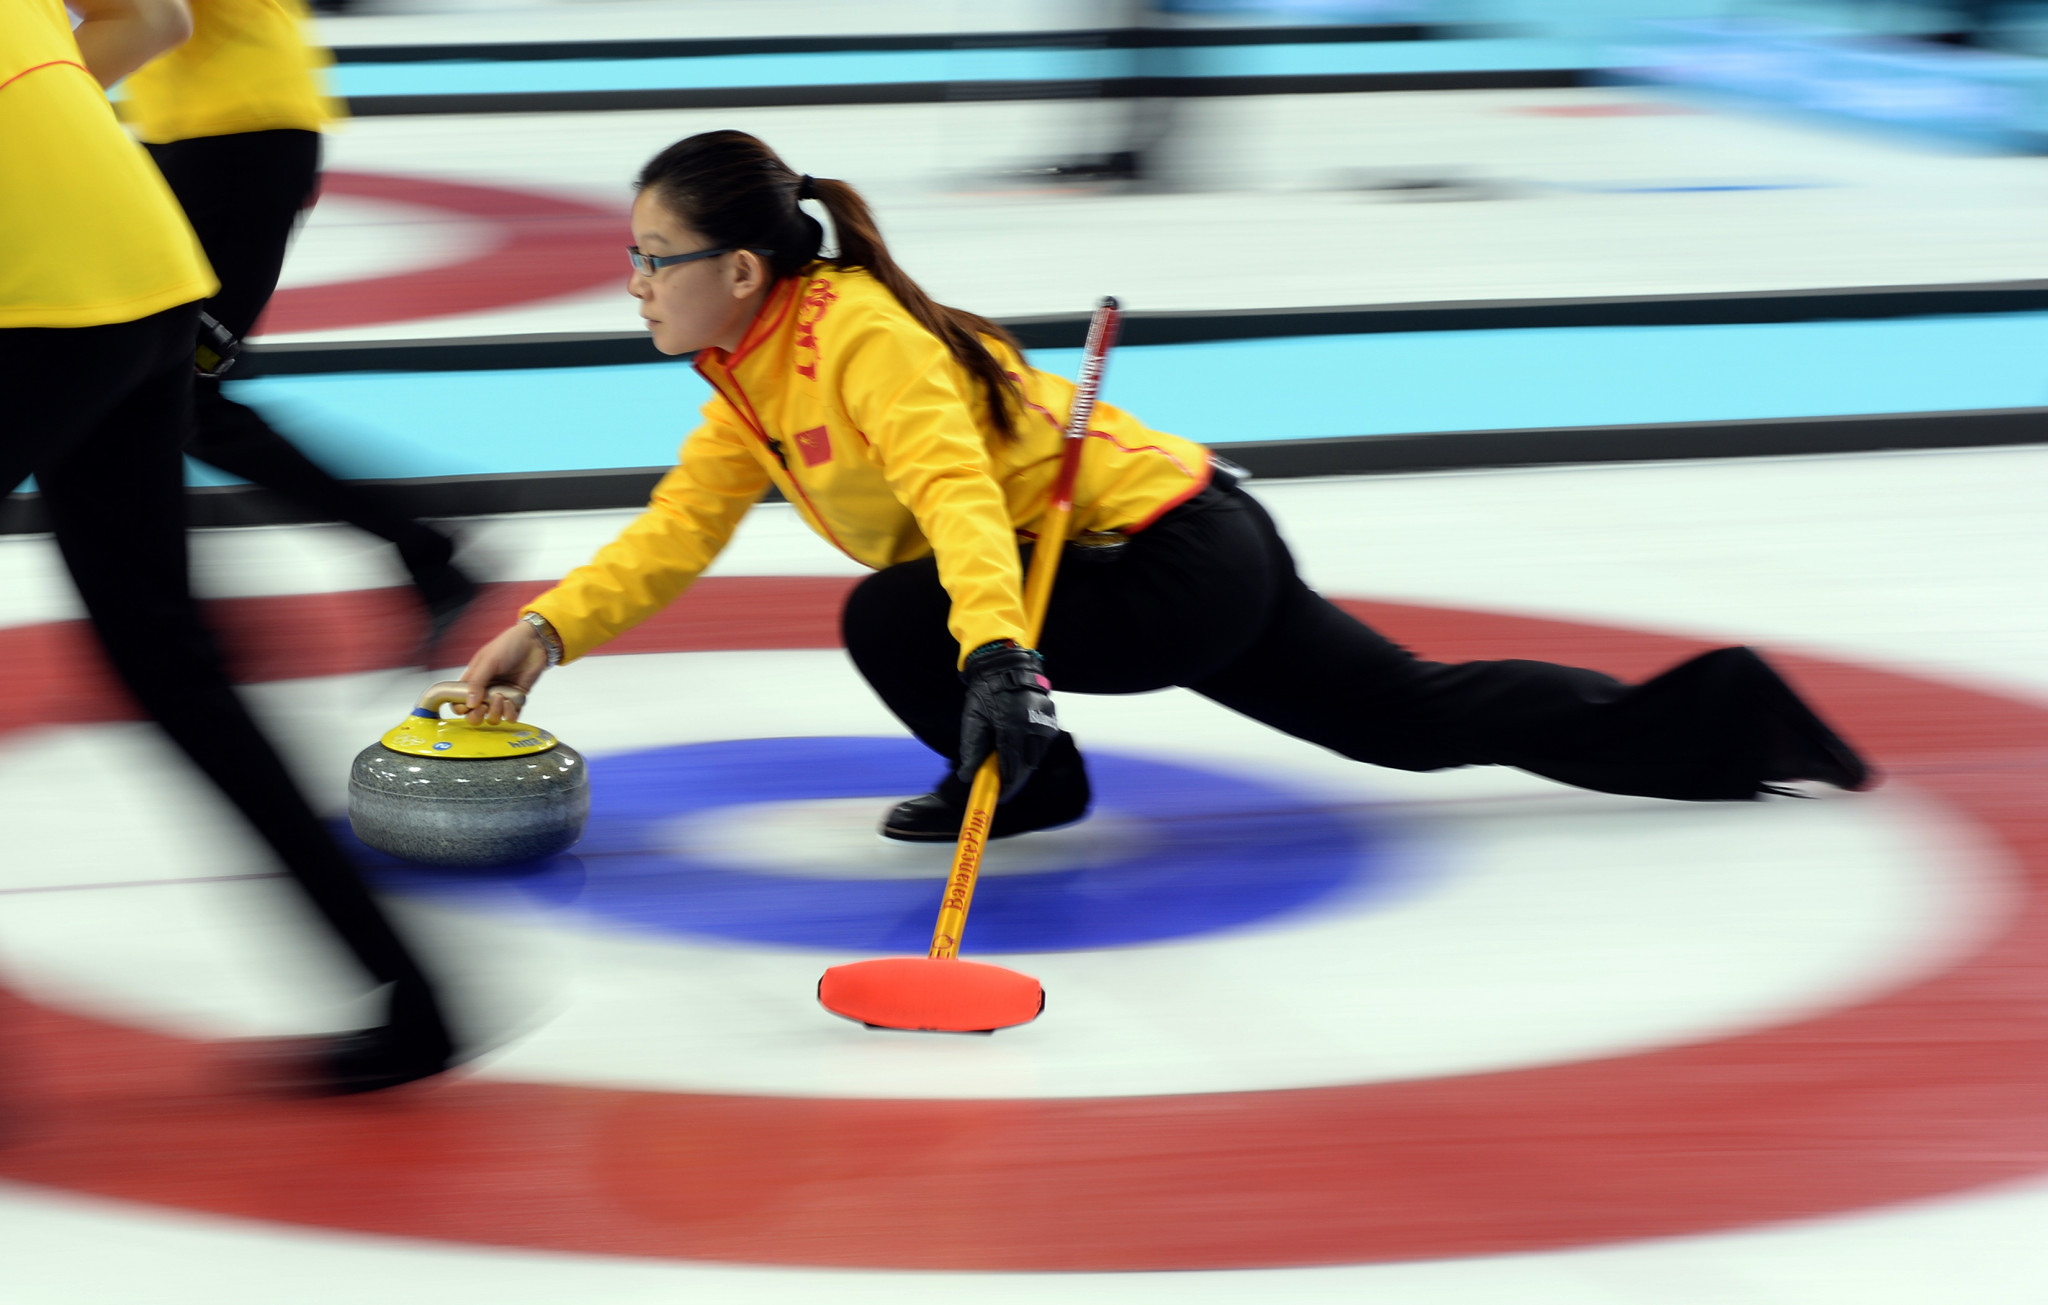 Chinese curling star Wang Bingyu was recently announced as the programme director for the sport at the Beijing 2022 Winter Olympic Games ©Getty Images